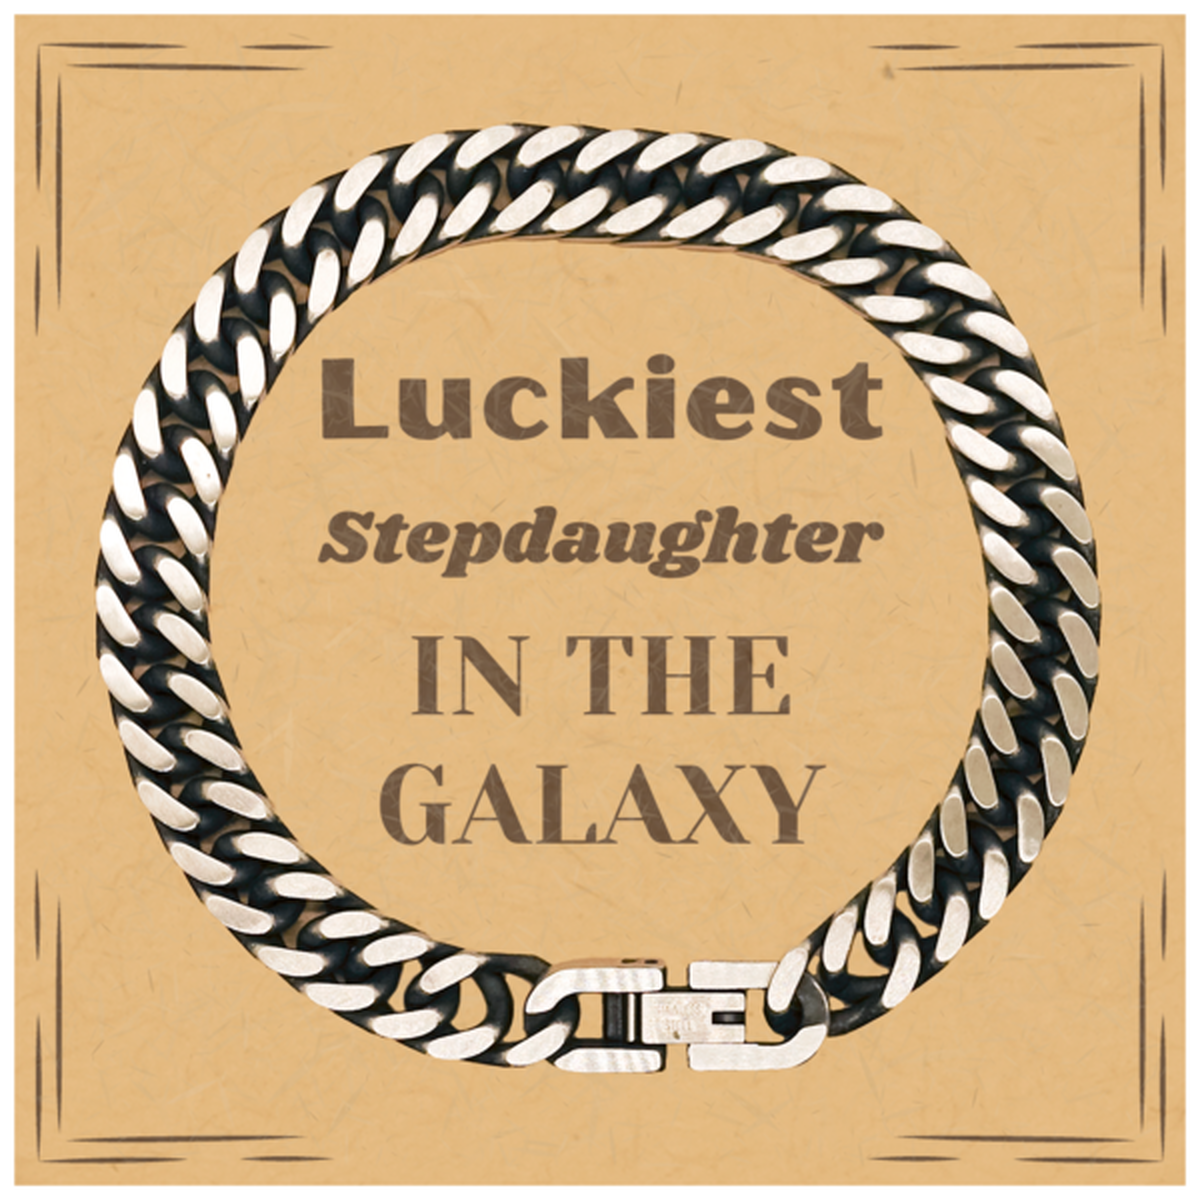 Luckiest Stepdaughter in the Galaxy, To My Stepdaughter Message Card Gifts, Christmas Stepdaughter Cuban Link Chain Bracelet Gifts, X-mas Birthday Unique Gifts For Stepdaughter Men Women